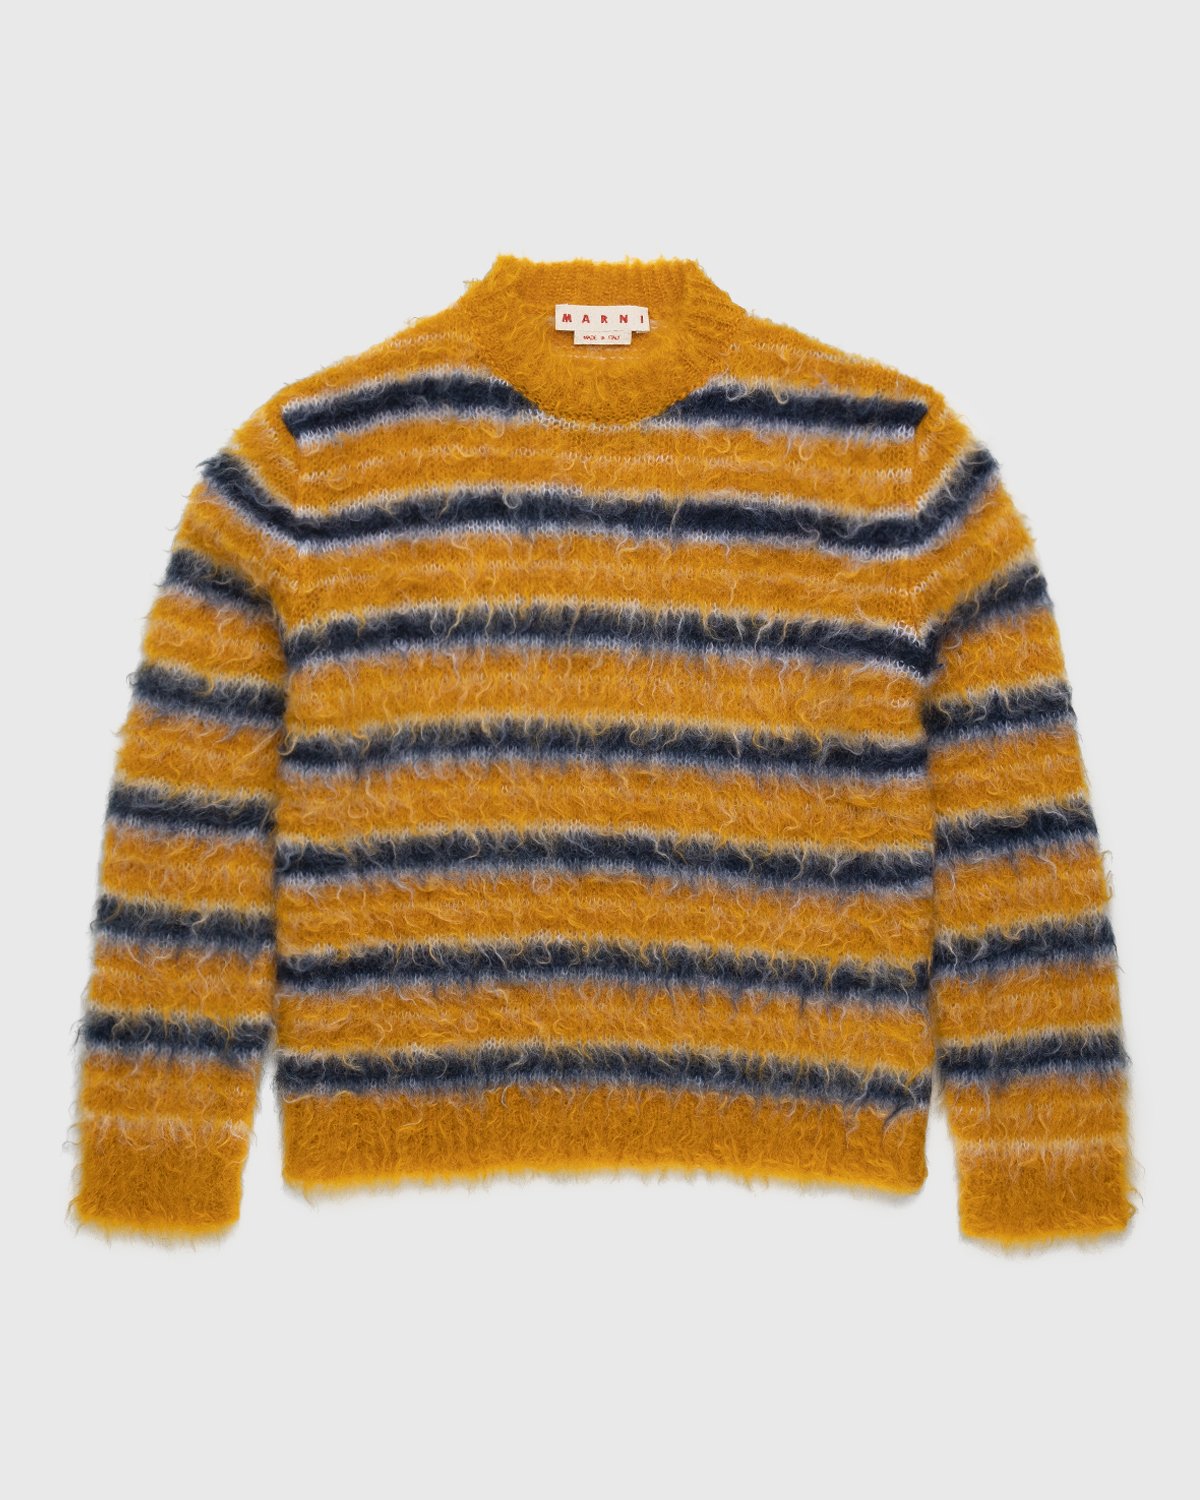 Marni - Striped Mohair Sweater Sunflower - Clothing - Yellow - Image 1